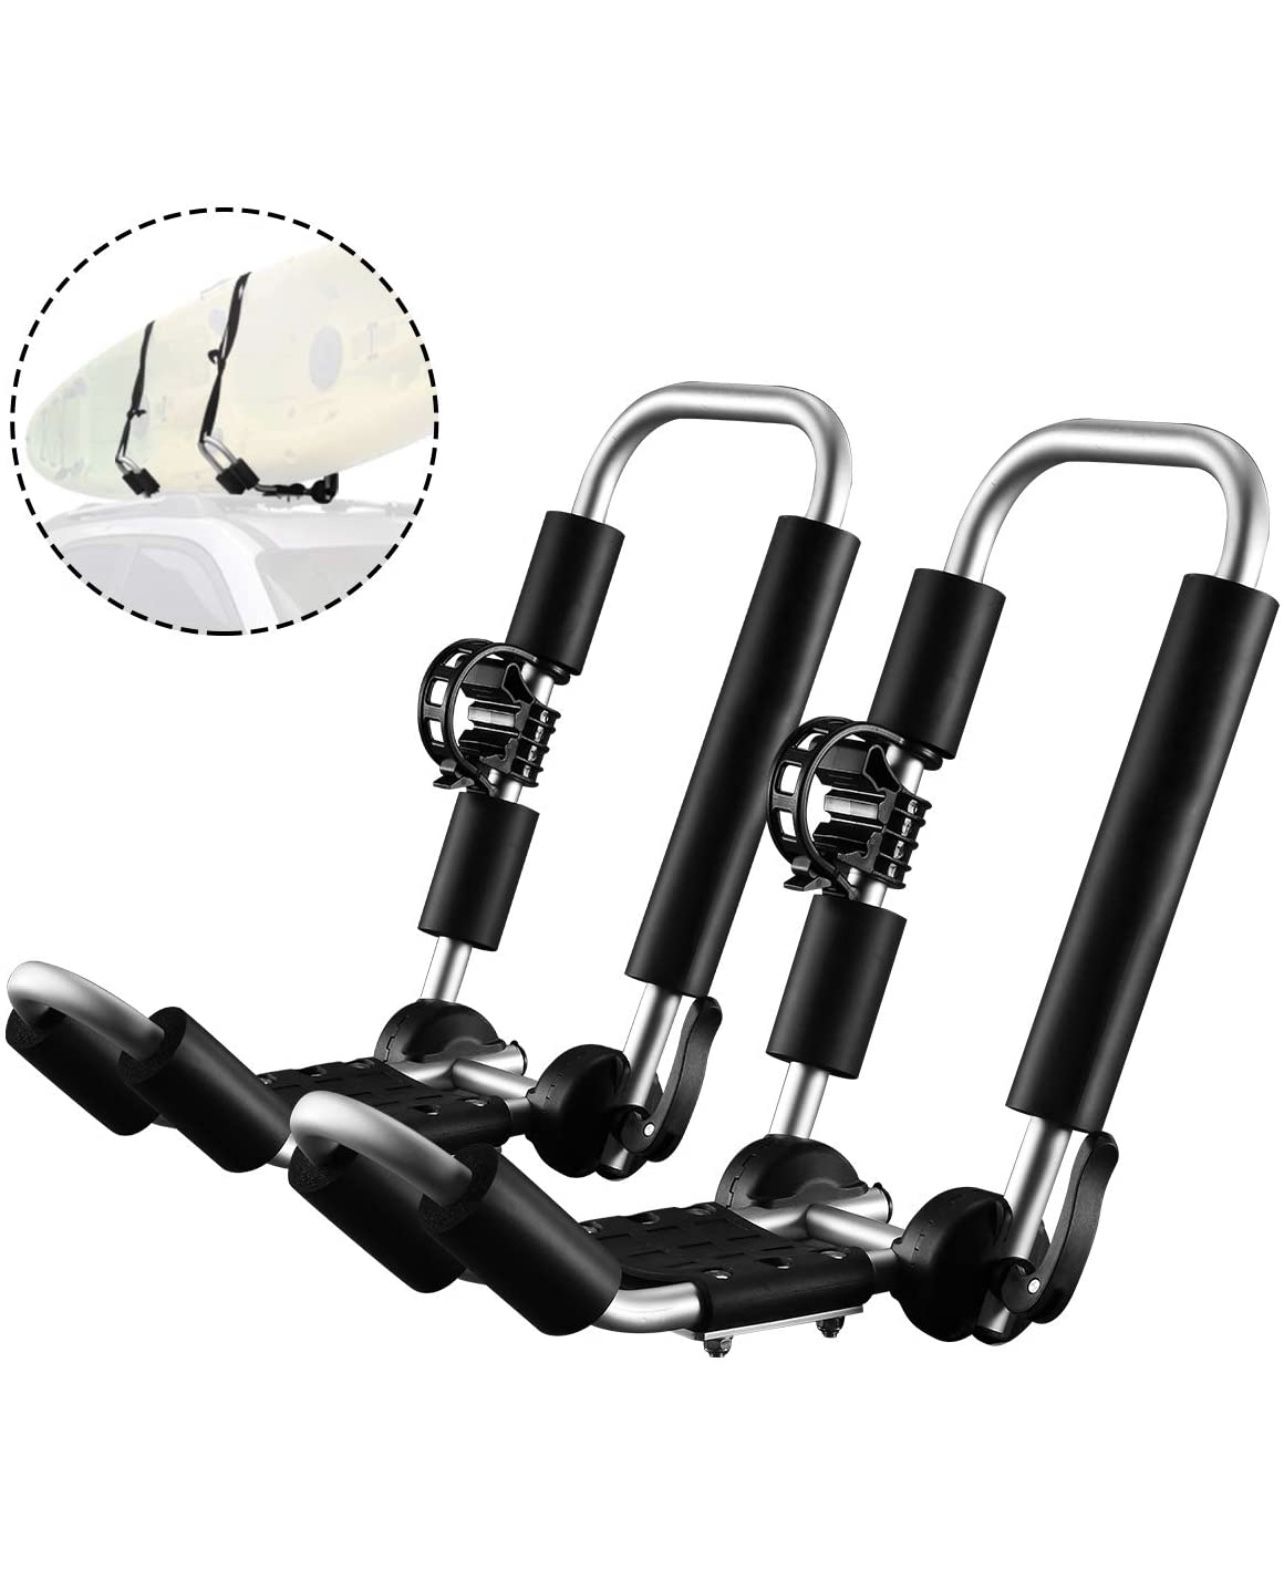 Photo 2 Pieces JBar Kayak Roof Rack Unilateral Universal Double Folding Kayak Carrier for Surf Board, SUP, Snowboard, Canoe Top Mount on Car, SUV, Truck Cr